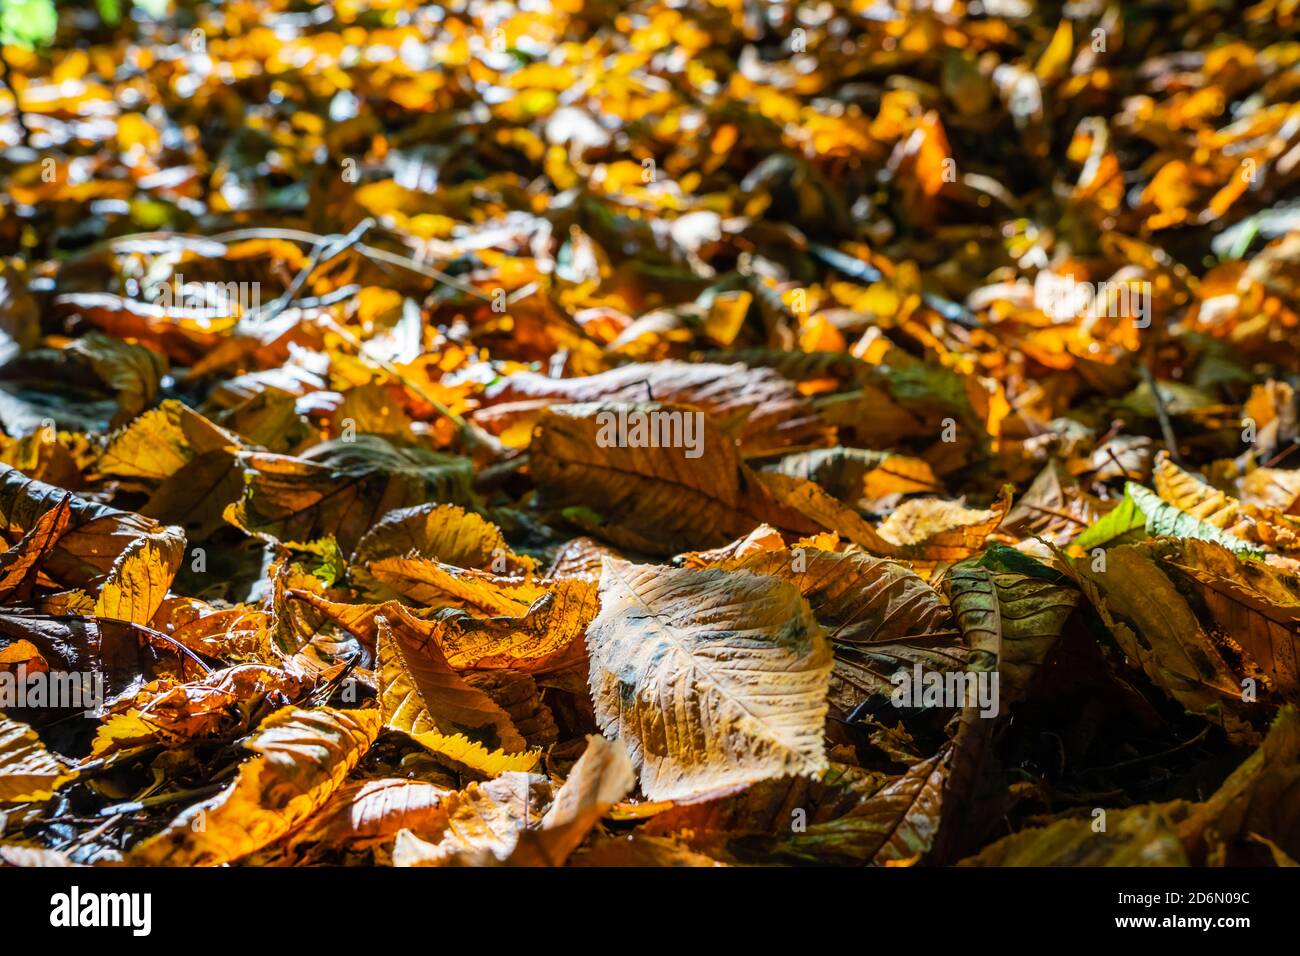 Autumn leaves lying on the woodland floor. Annual cycle of life. Stock Photo